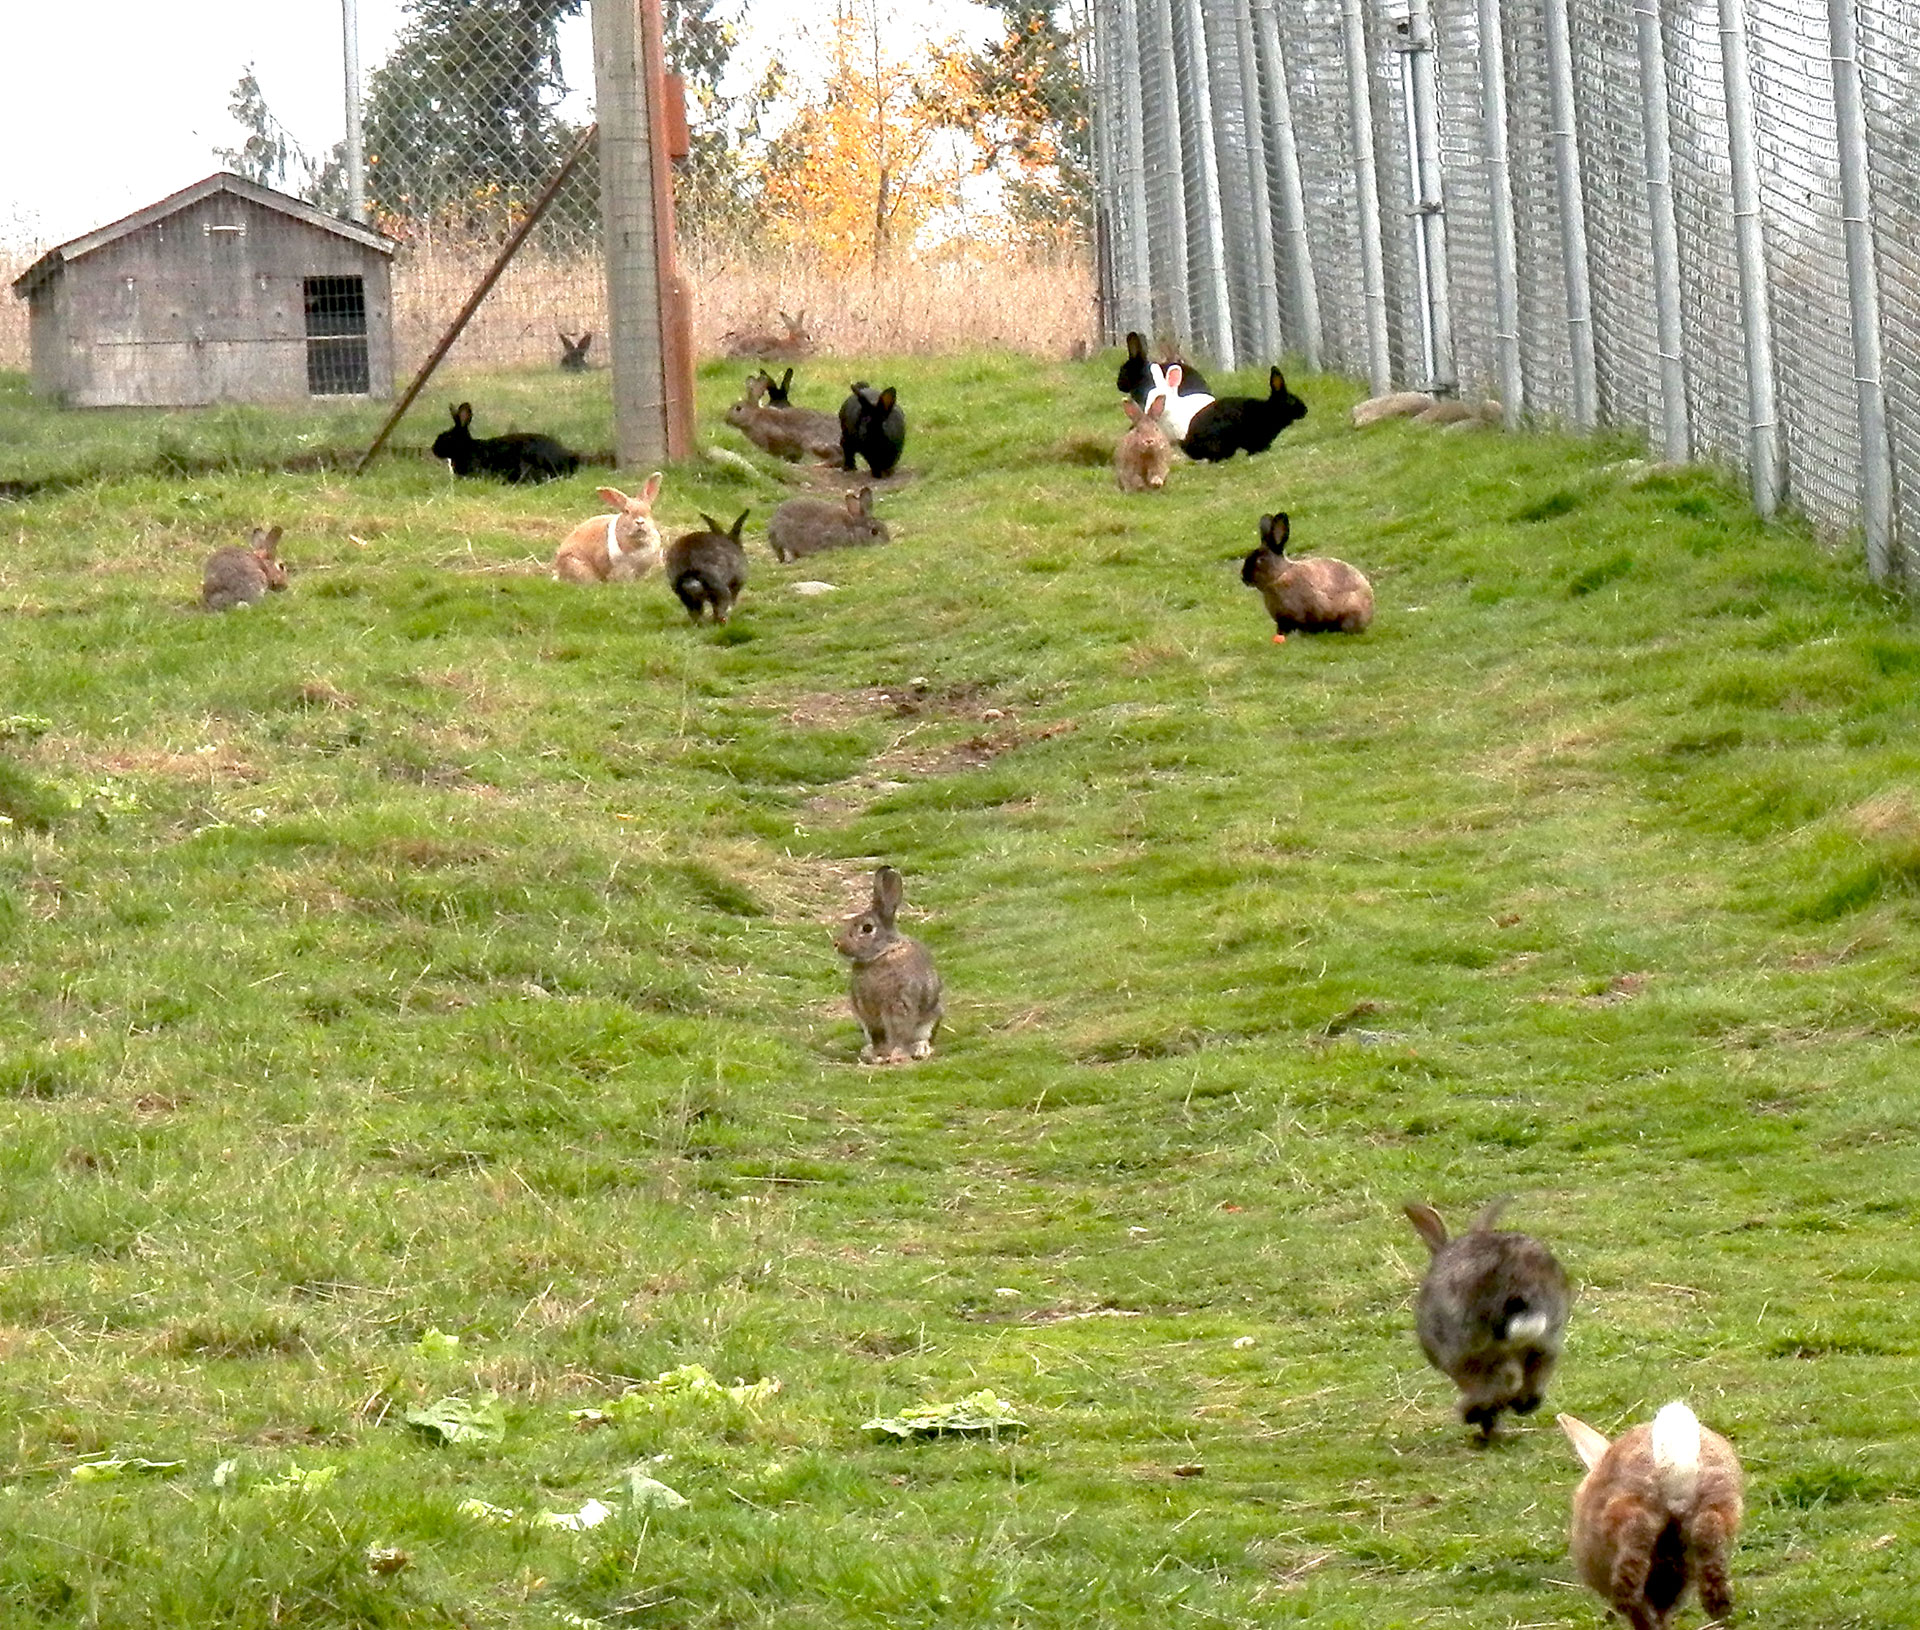 The rabbits hopping around their new home